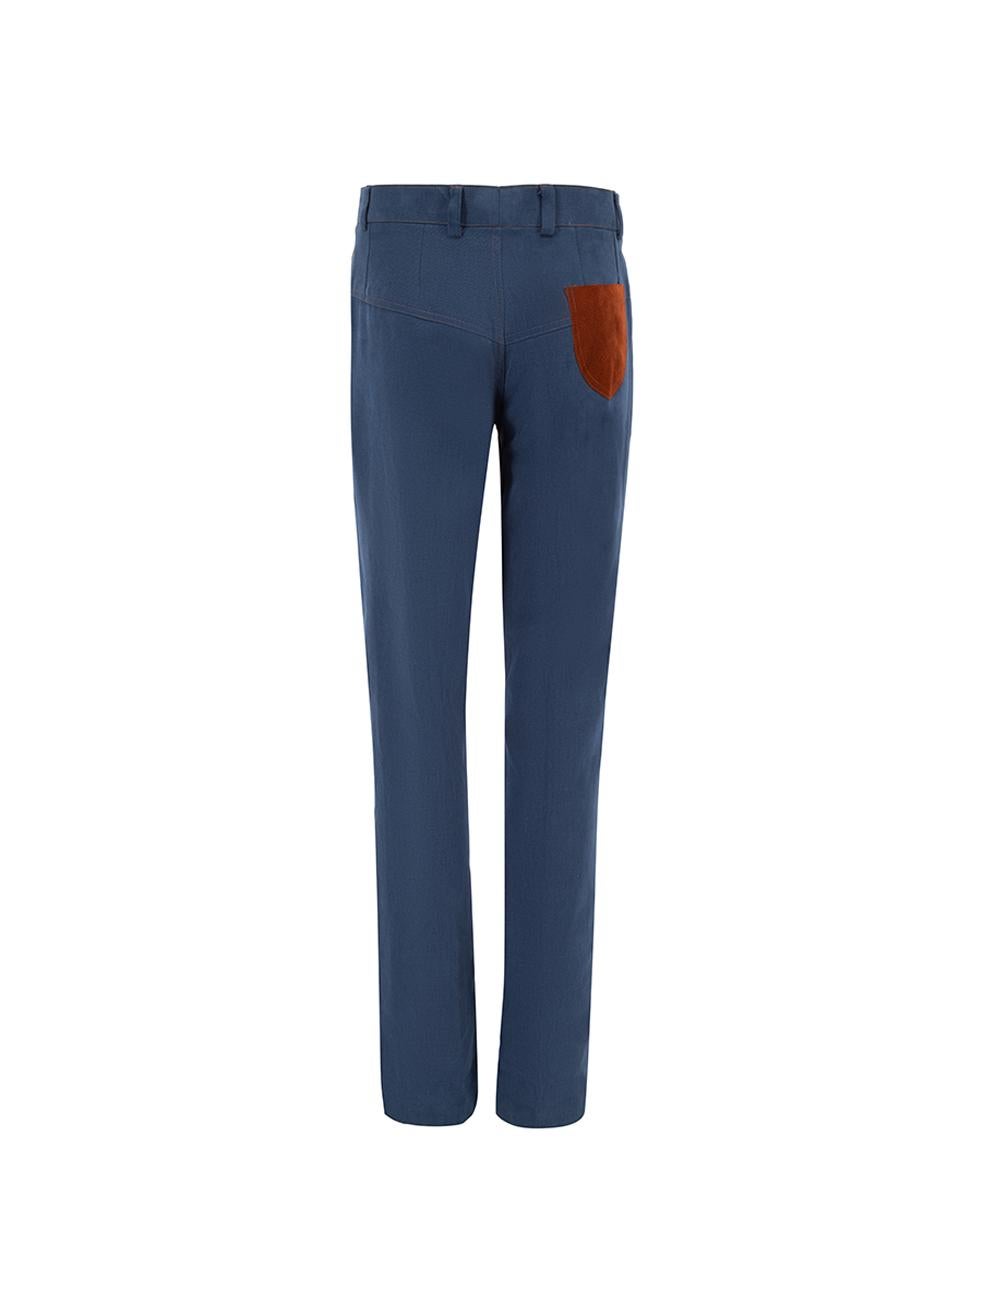 Sanne Women's Blue Trousers with Brown Accent In Good Condition For Sale In London, GB